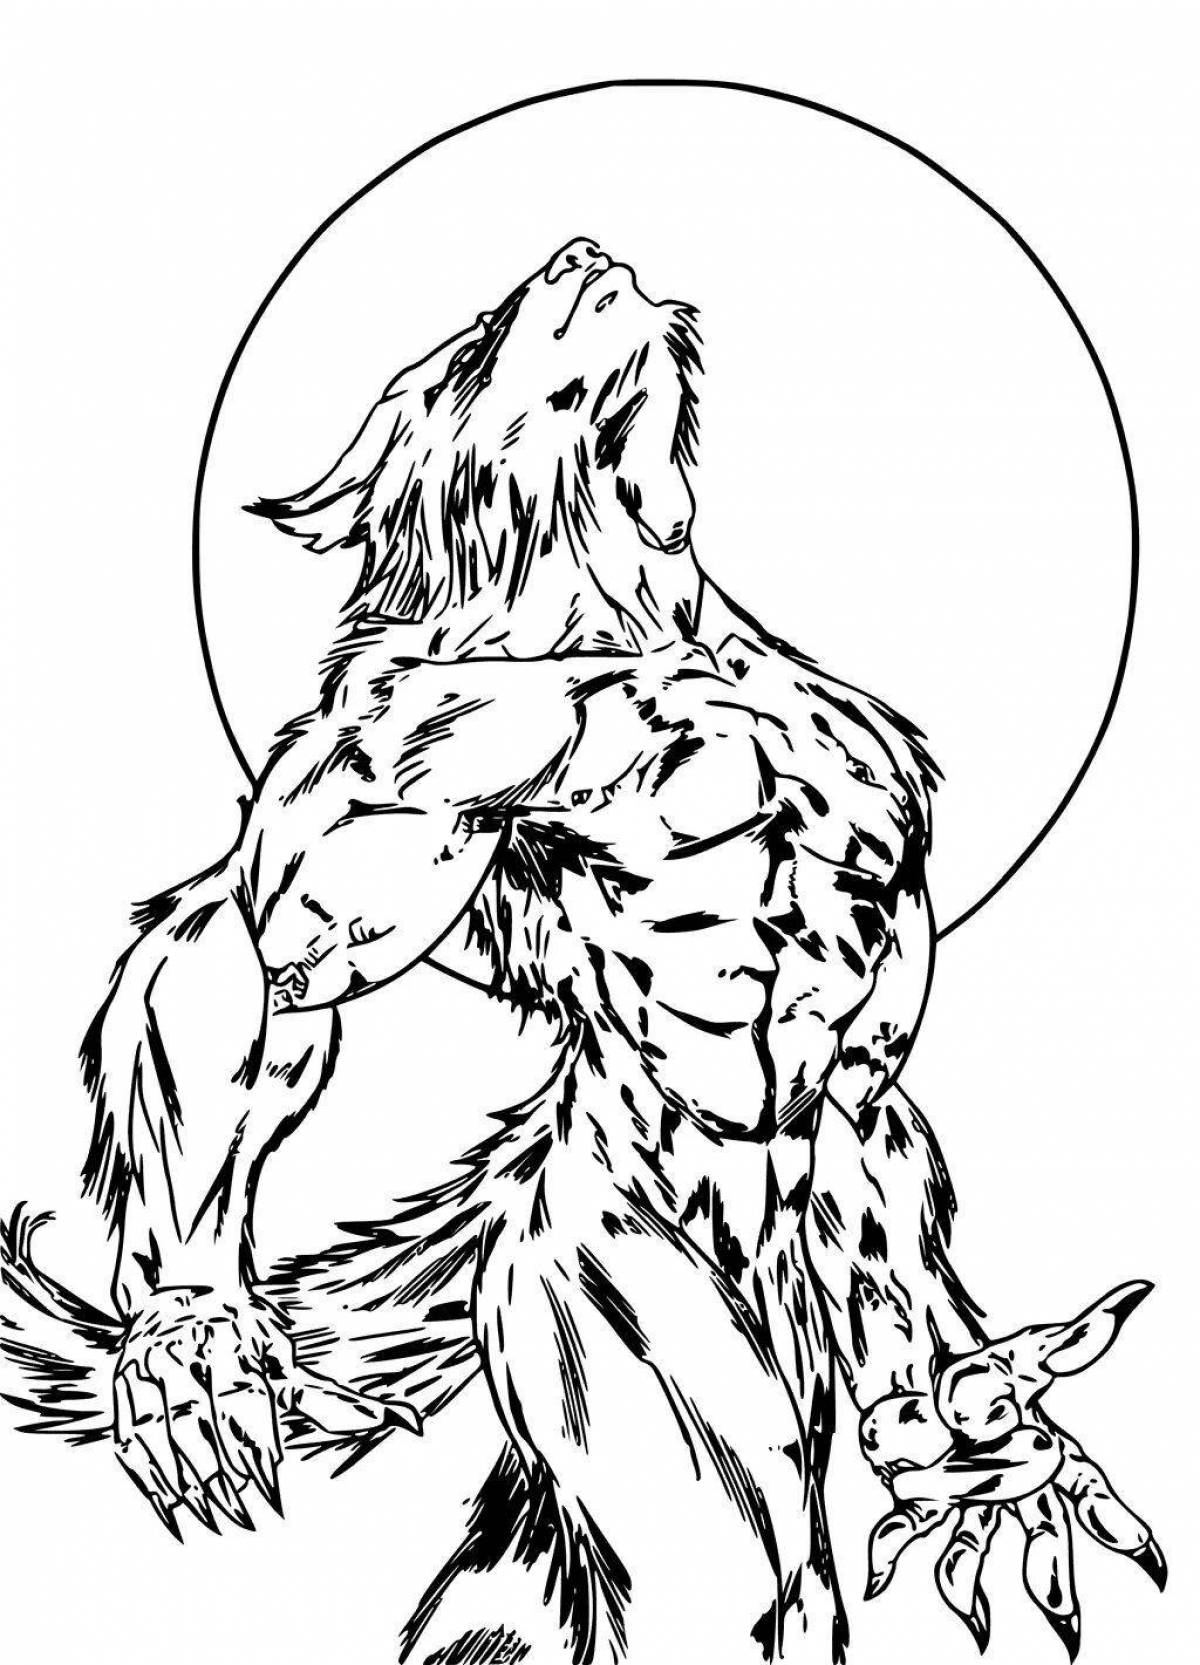 Creepy werewolf coloring book for kids